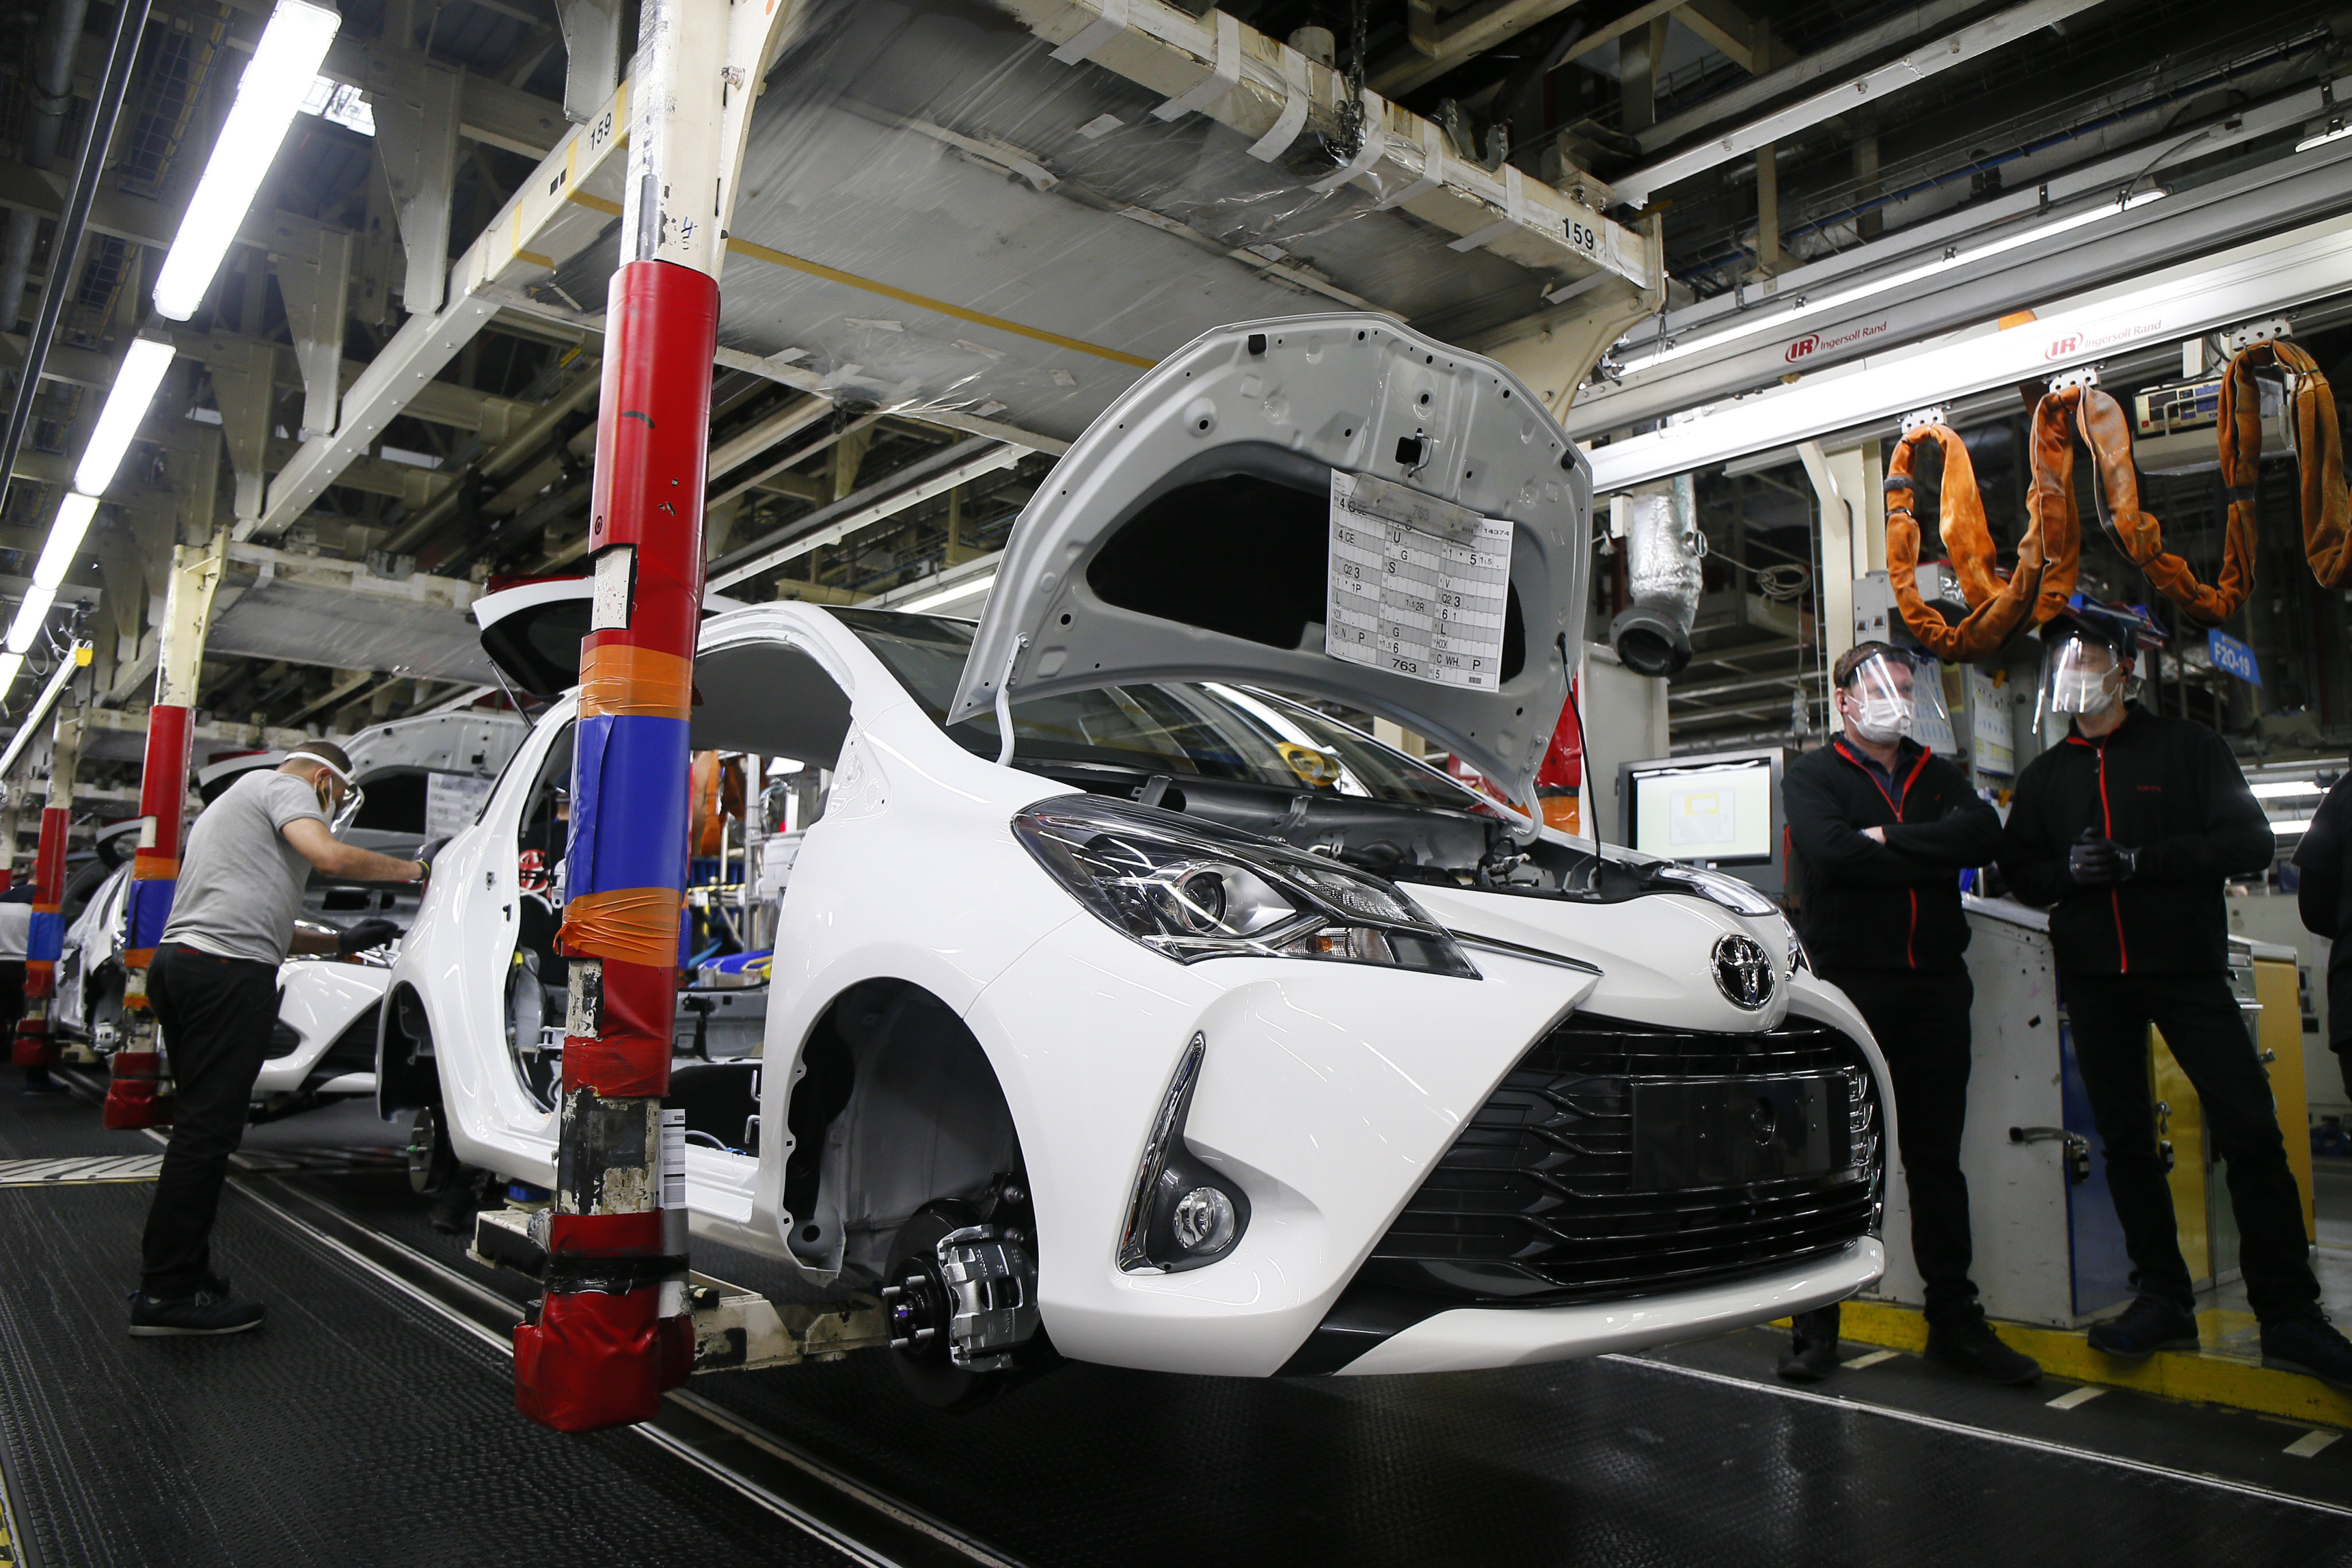 Employees work on a Yaris car at the Toyota car factory in Onnaing, northern France, on April 28, 2020. Photo: AP